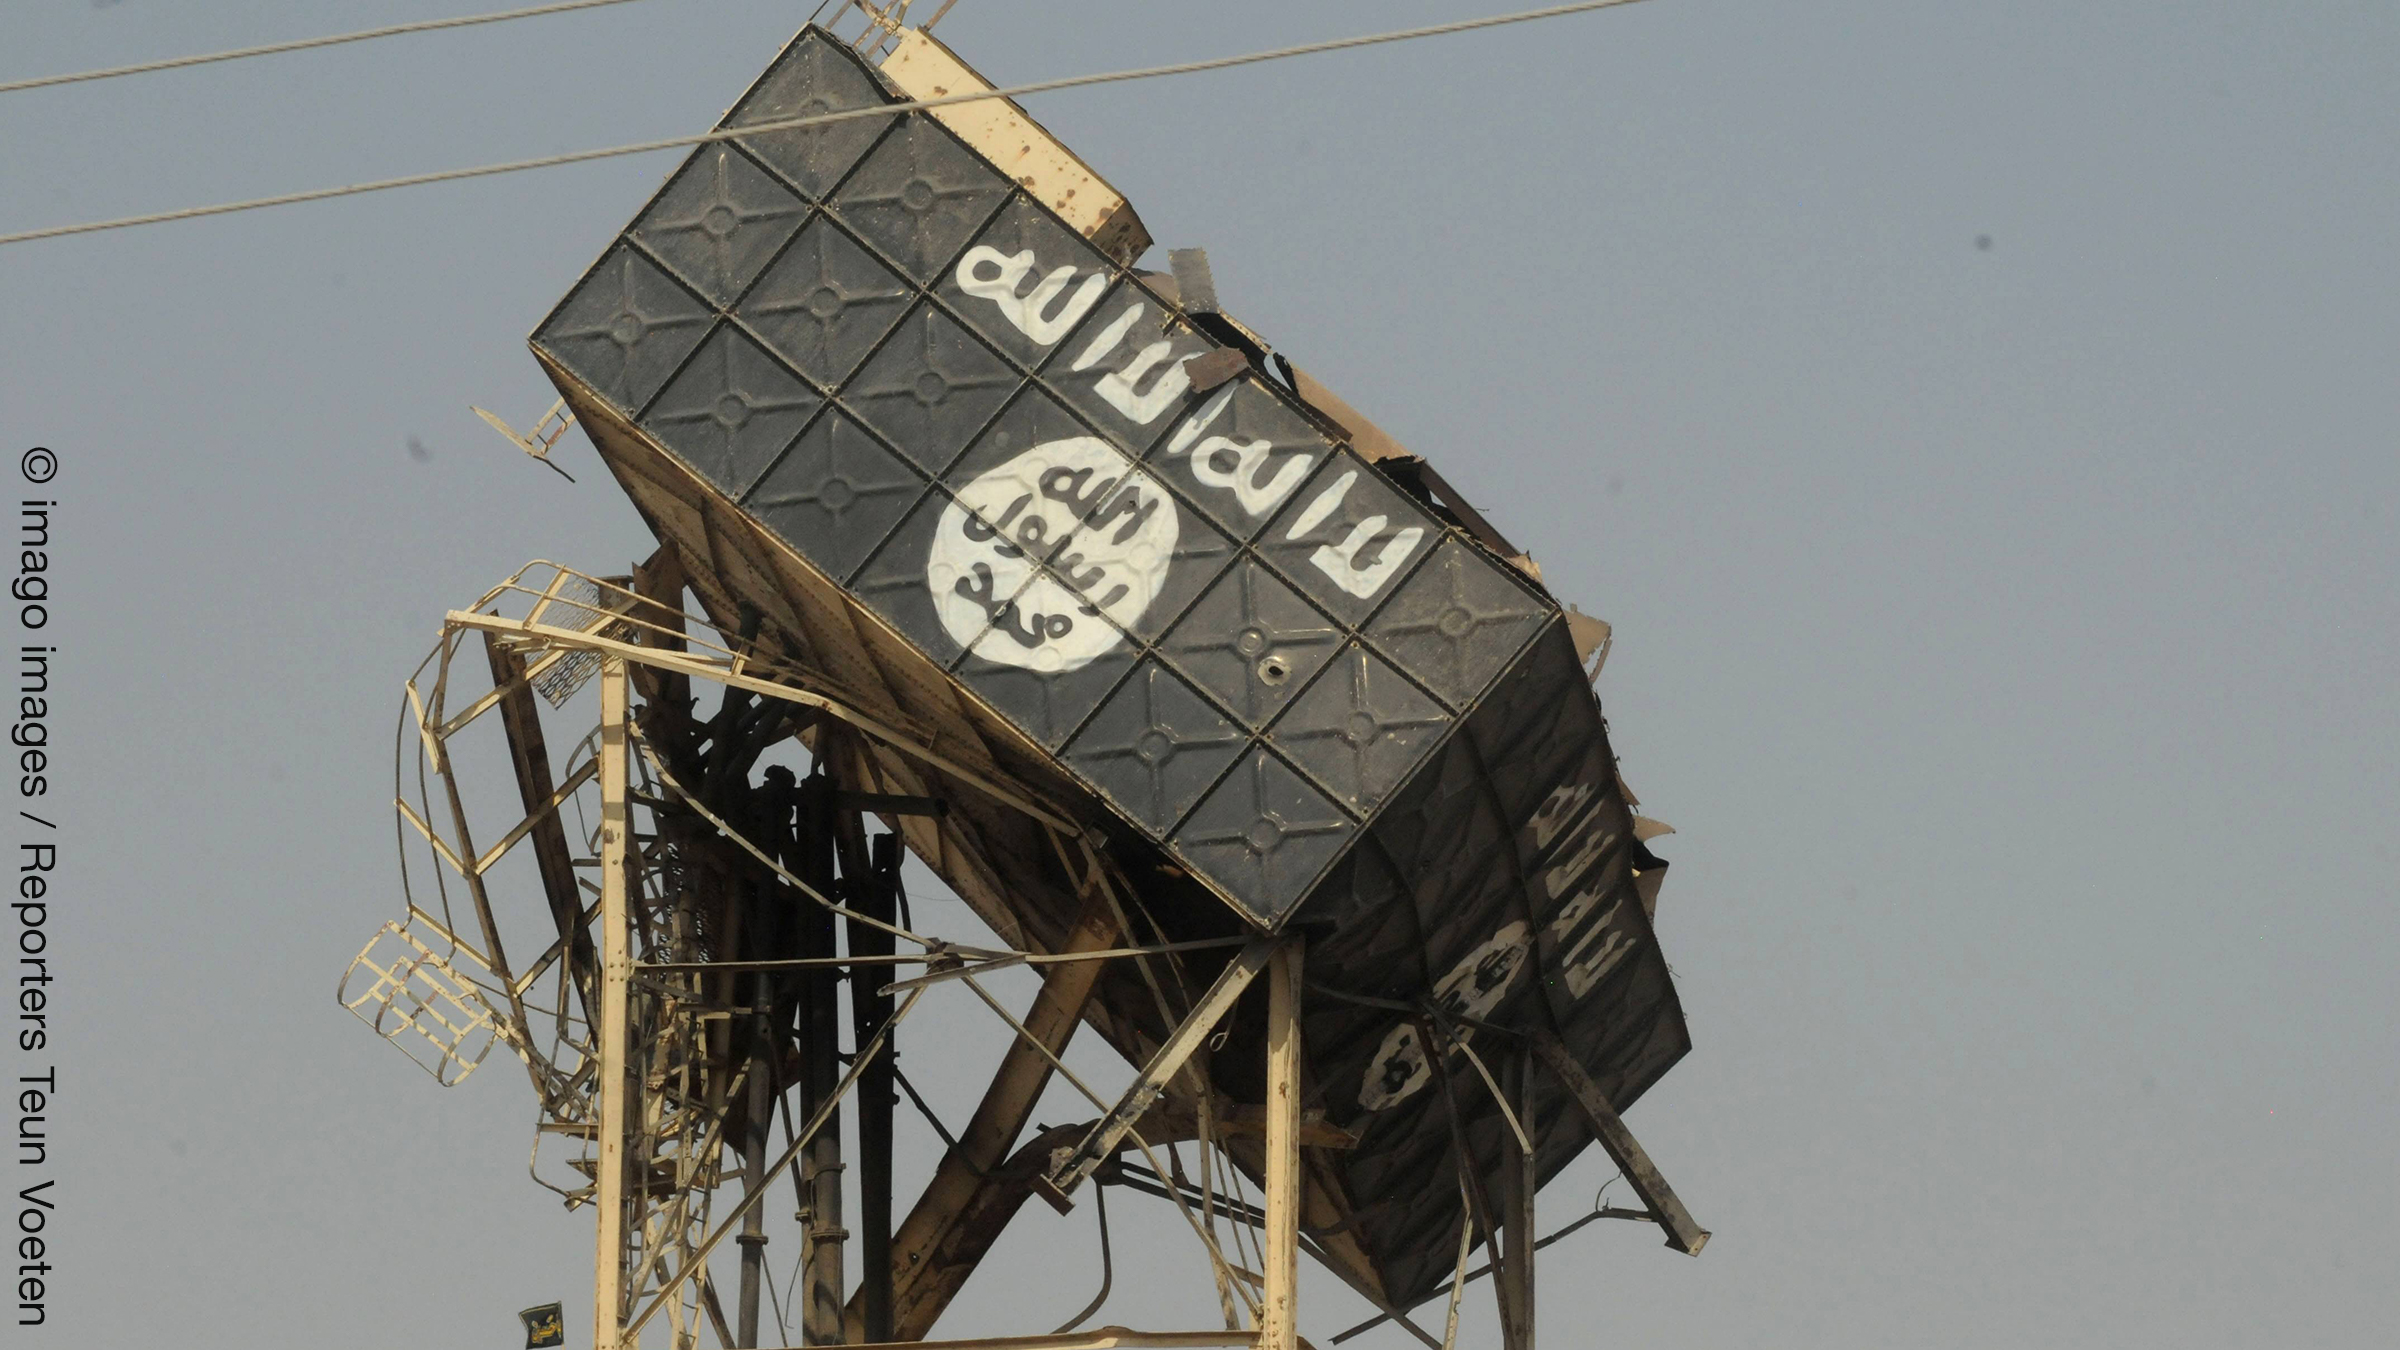 ISIS has painted their logo, the black flag, on a water tower